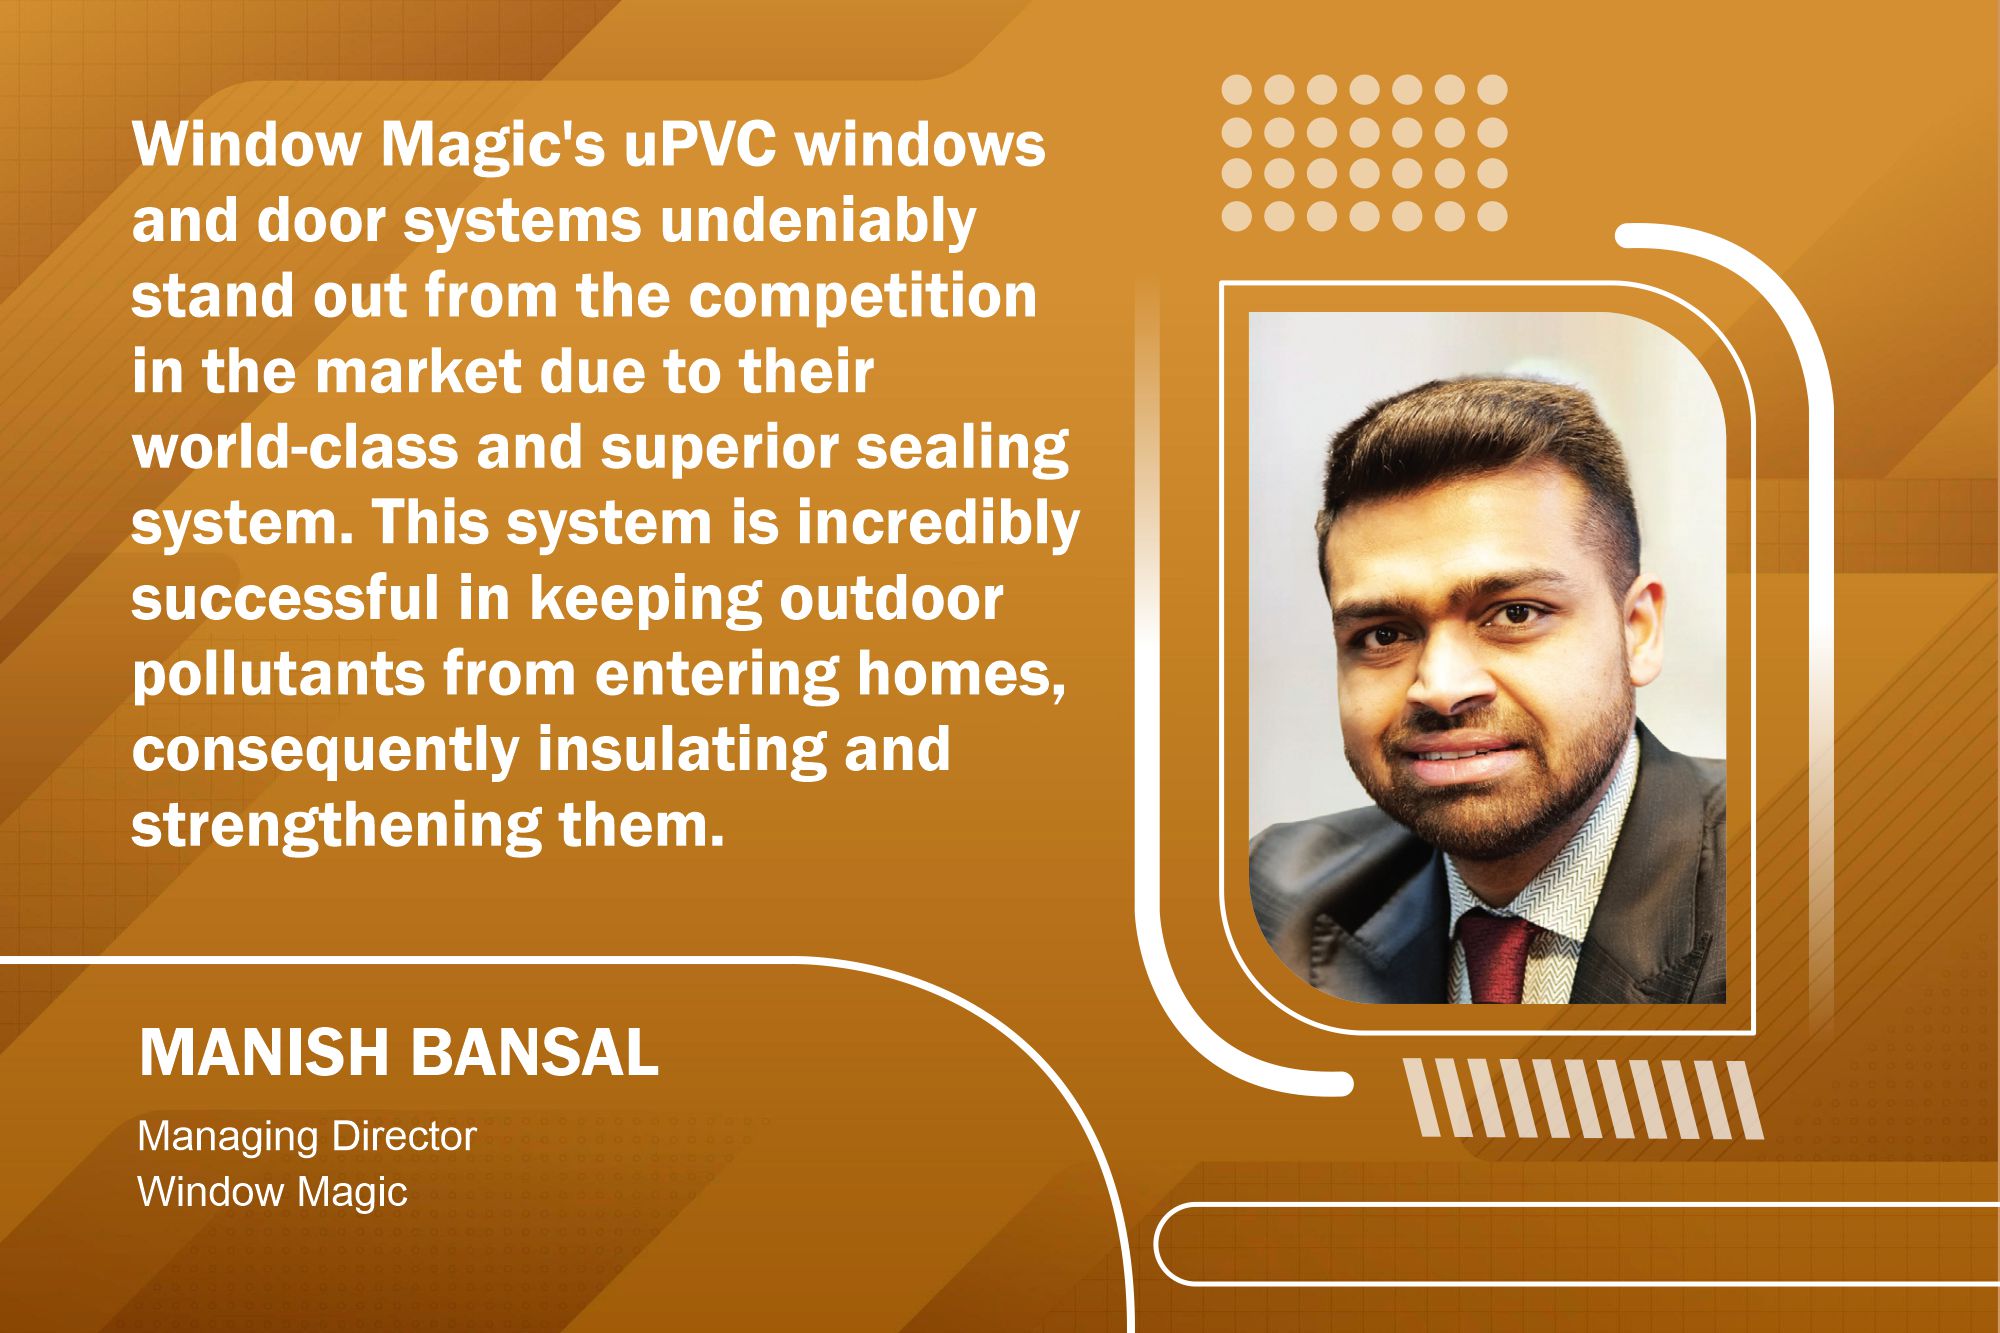 Window Magic uPVC Windows superior sealing and pollutant protection